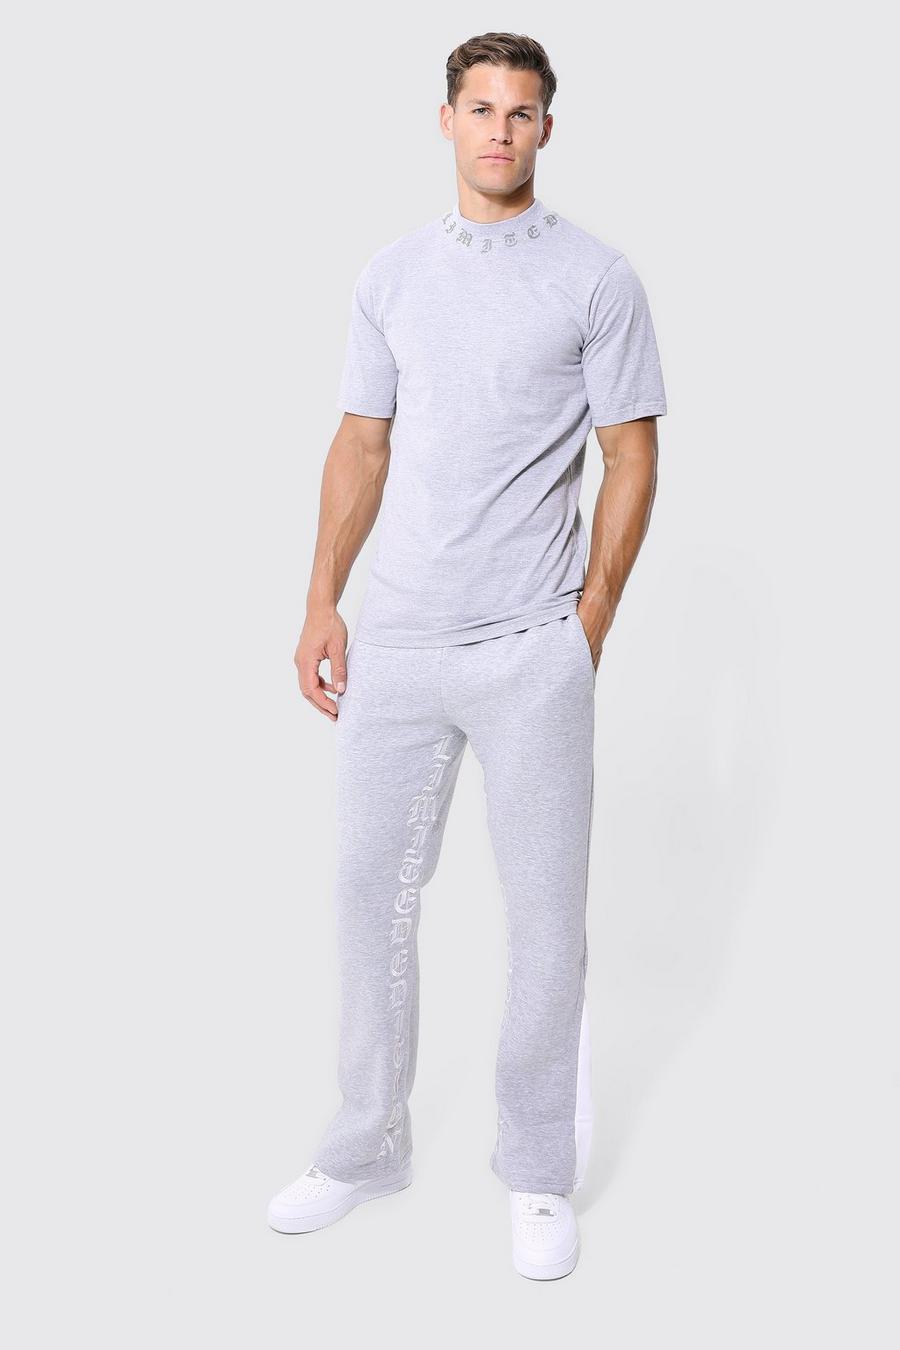 Grey marl Tall Gothic Print Gusset T-shirt Tracksuit